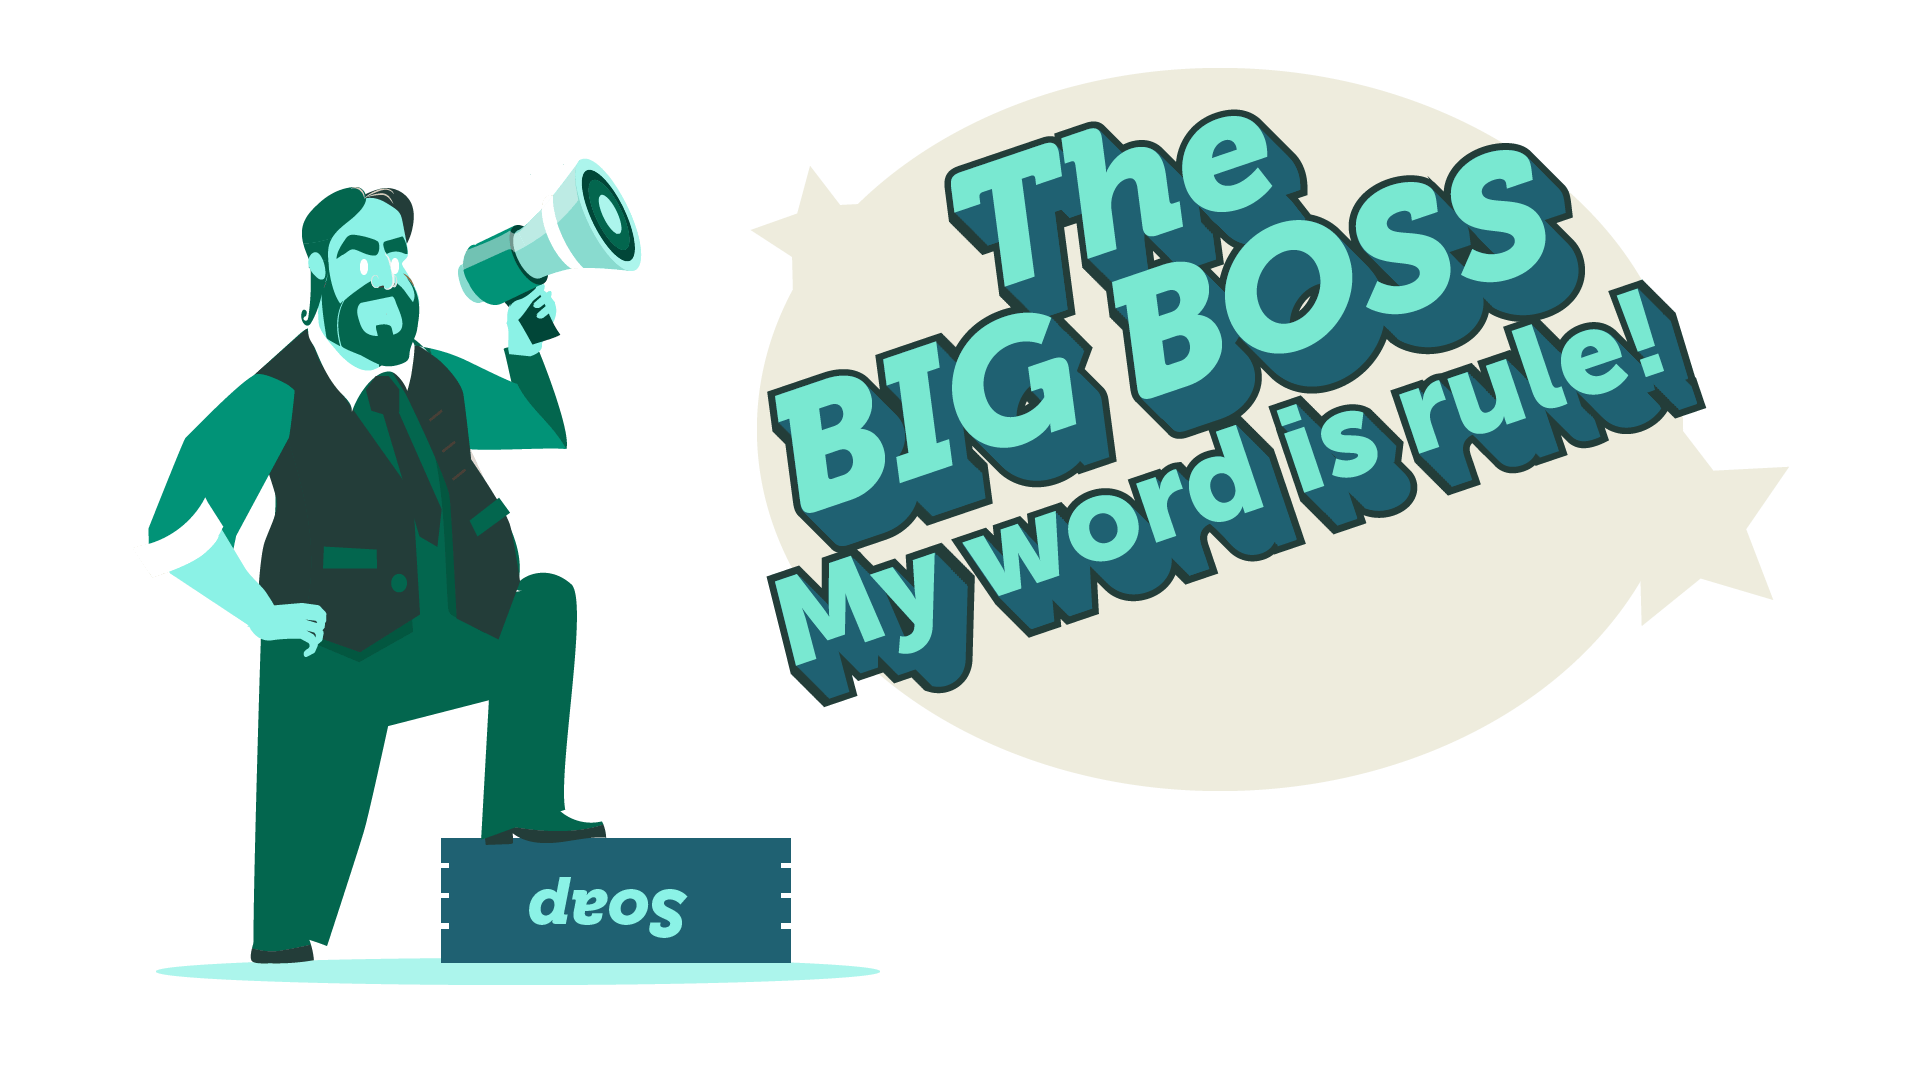 IMAGE: Title ‘The Big Boss’ subtitle ‘My word is rule.’ - types of marketing consultants